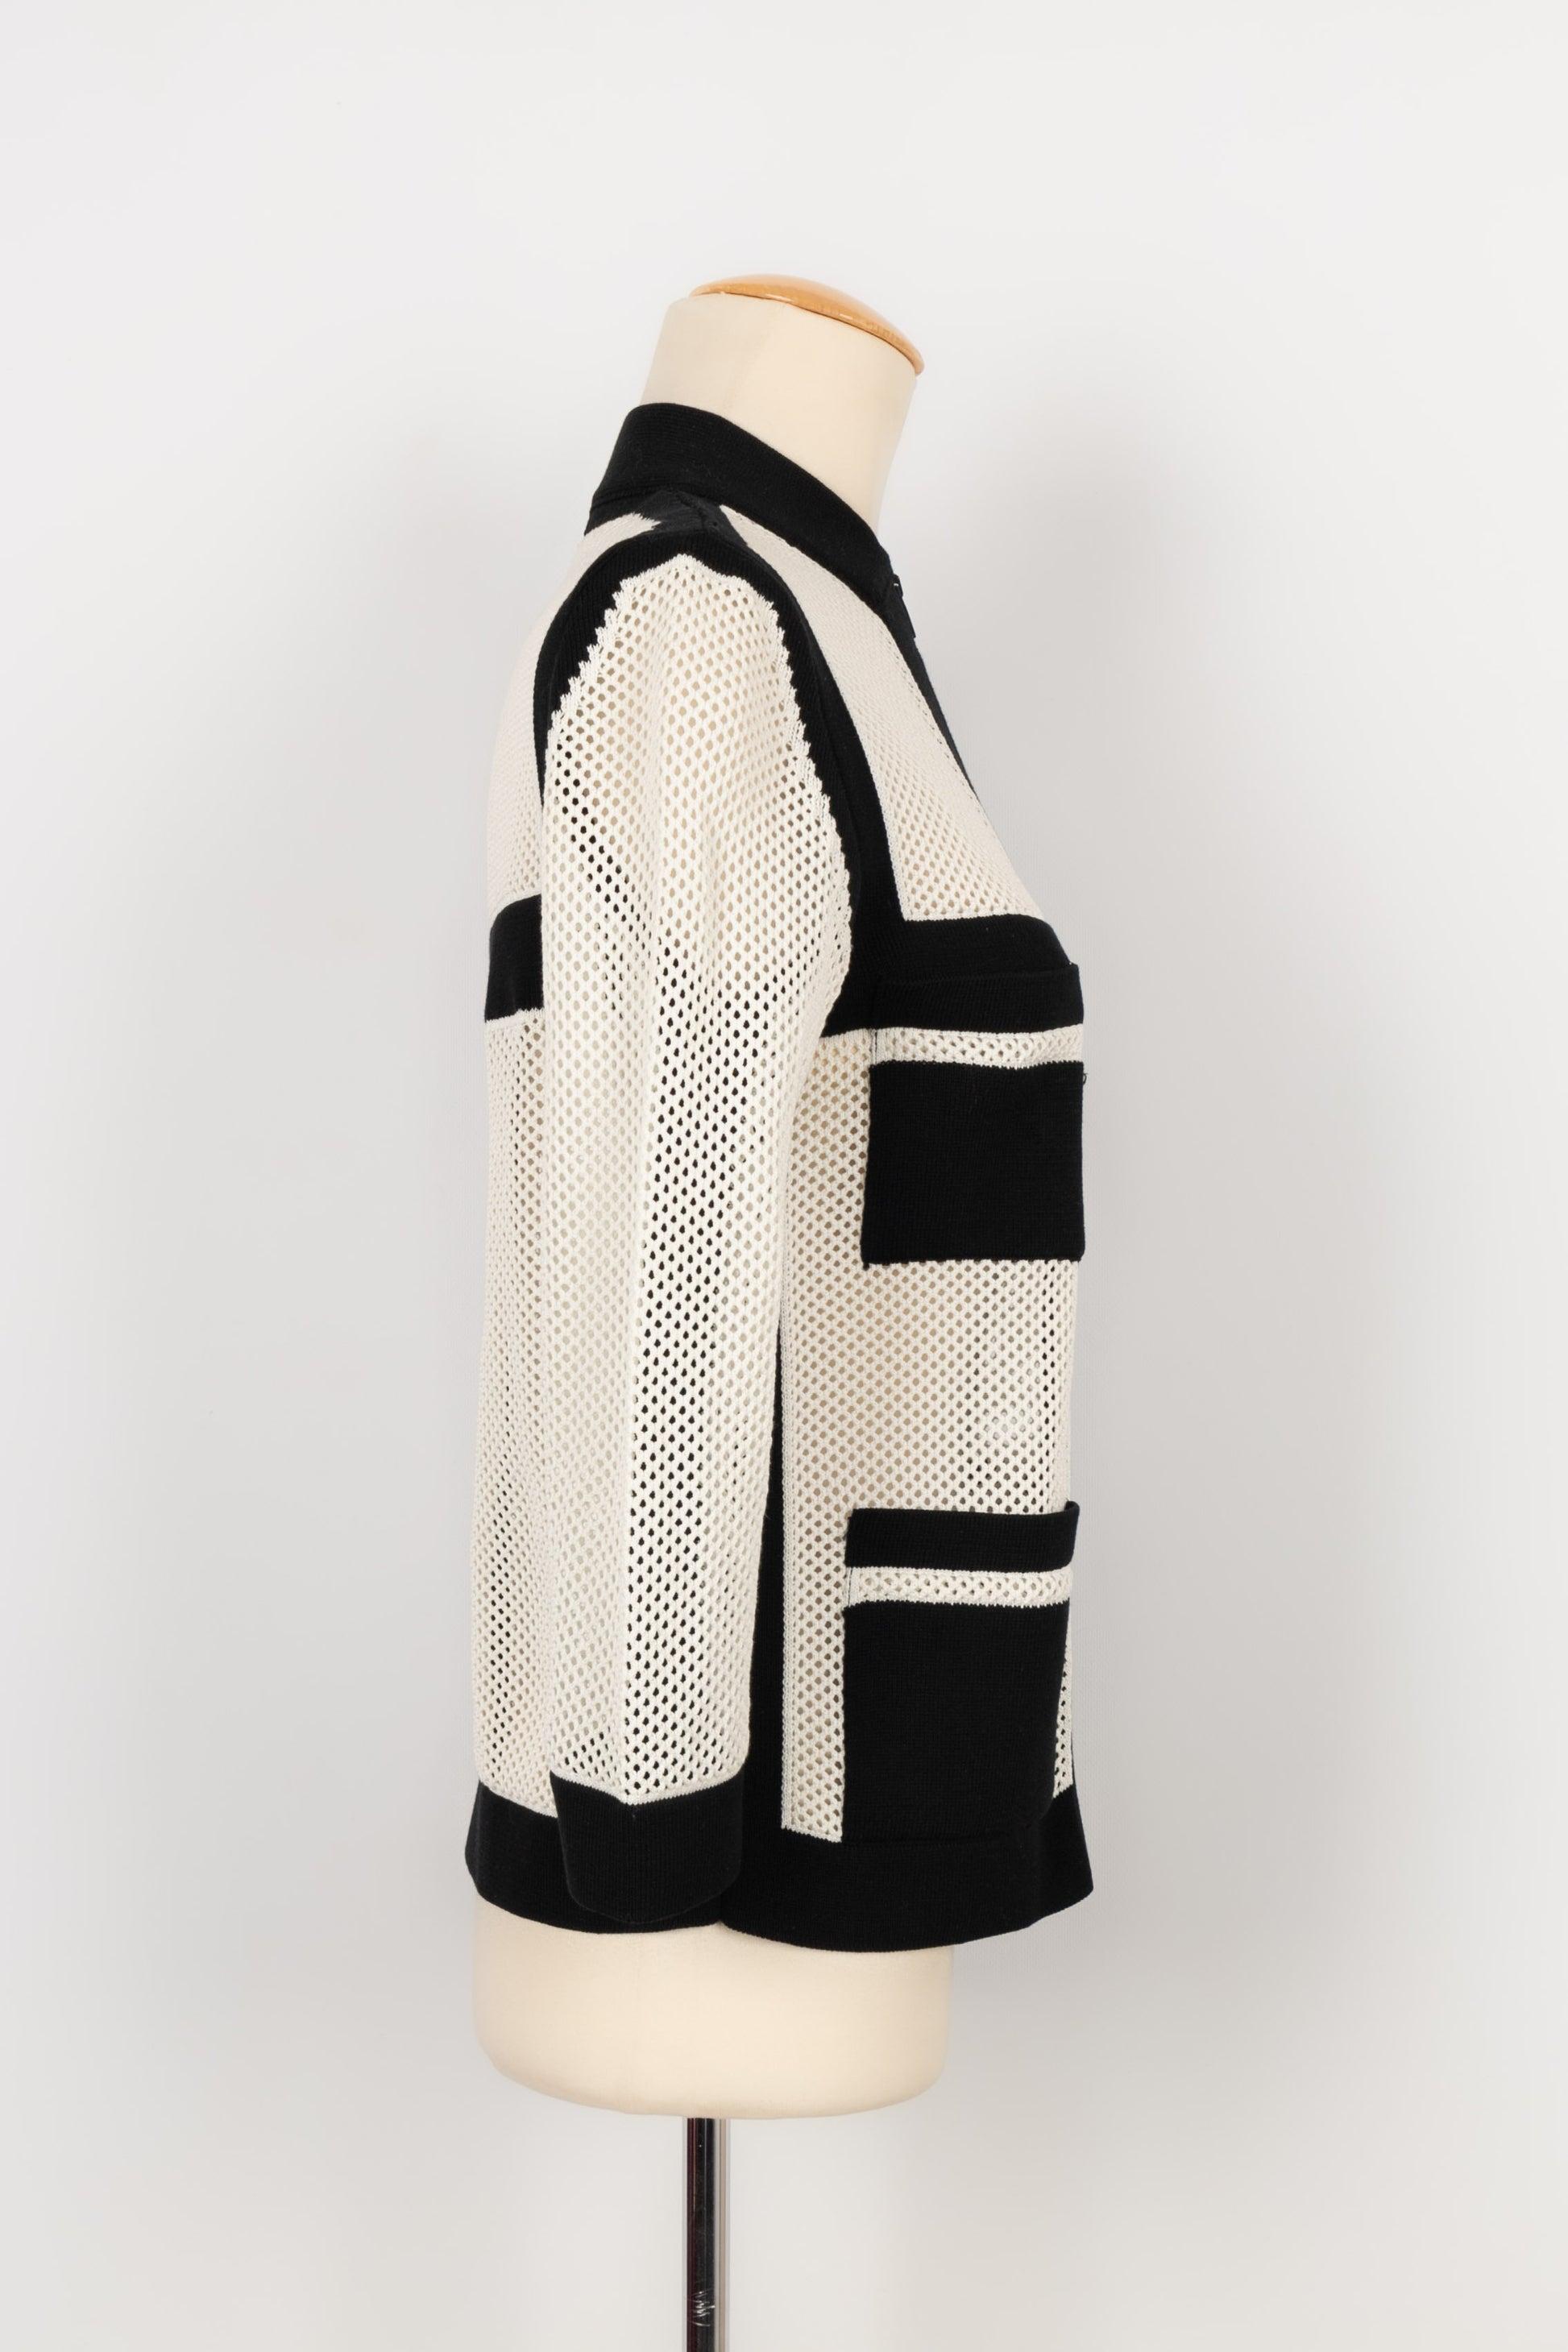 Chanel Jacket-Style Zipped Top in Black and White Mesh In Excellent Condition For Sale In SAINT-OUEN-SUR-SEINE, FR